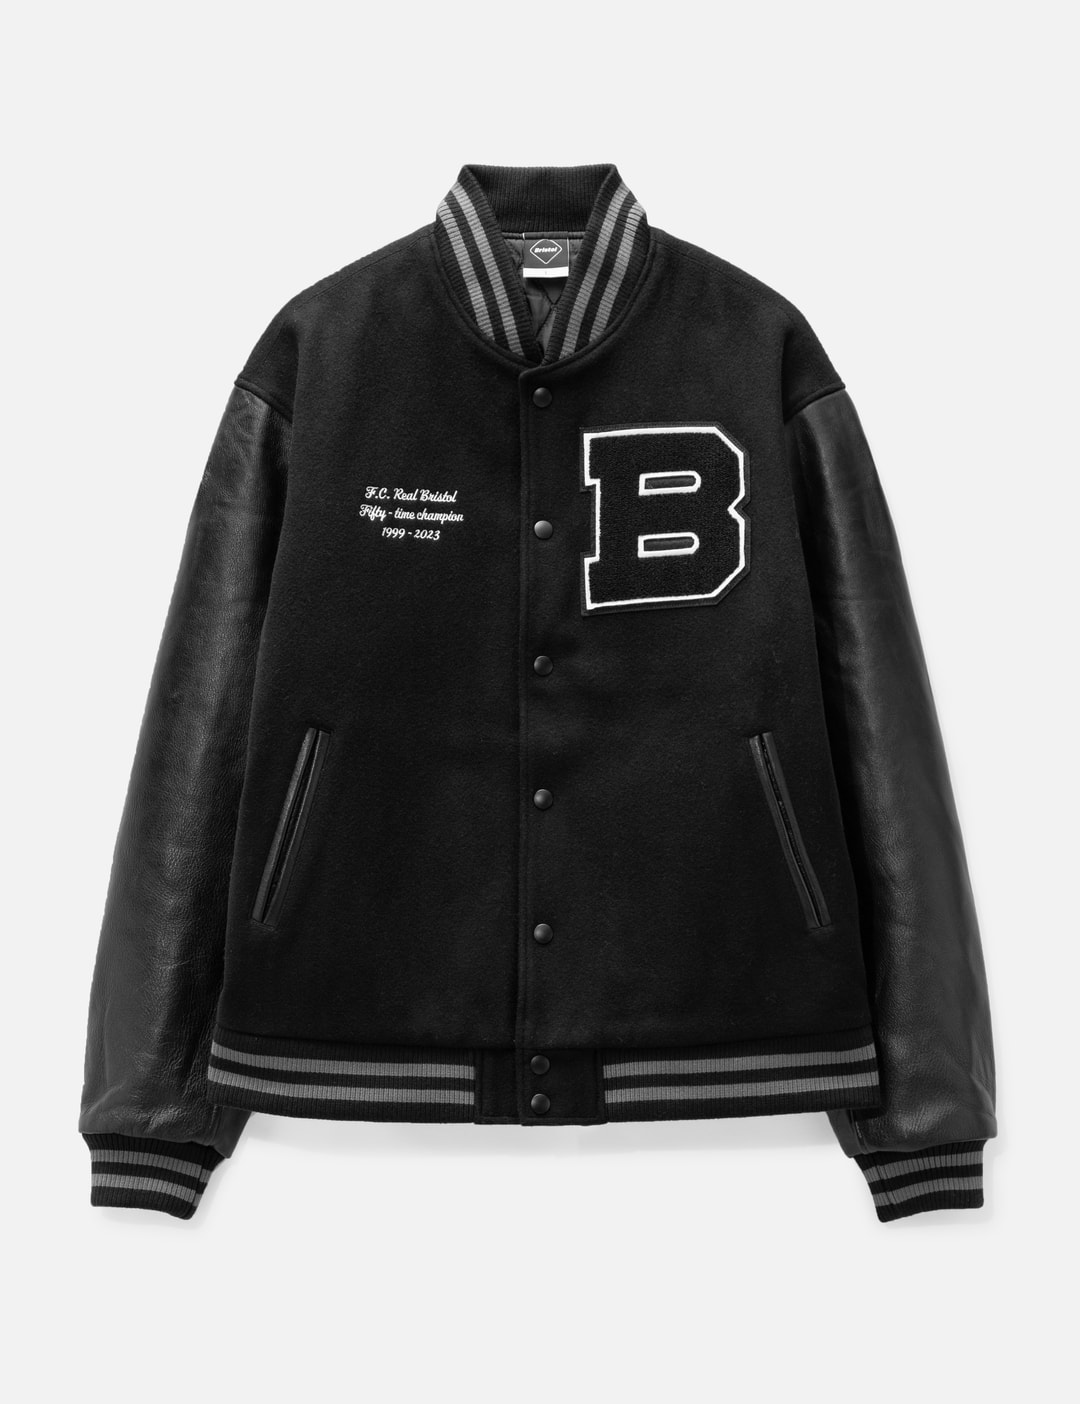 F.C. Real Bristol - Varsity Jacket | HBX - Globally Curated Fashion and ...